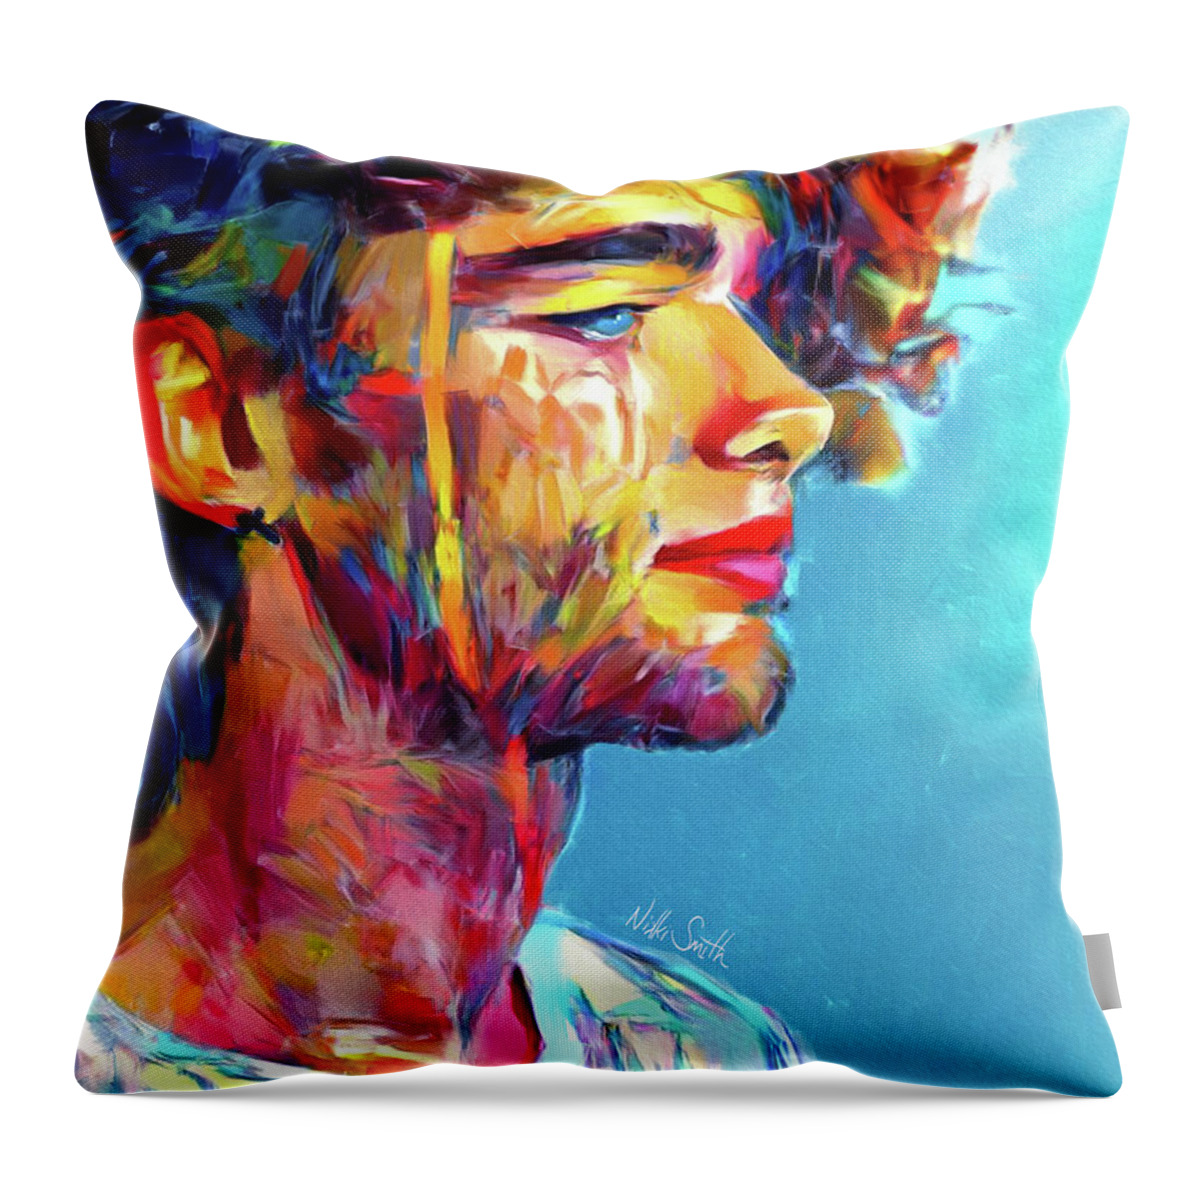 Bold Throw Pillow featuring the digital art True Colors by Nikki Marie Smith